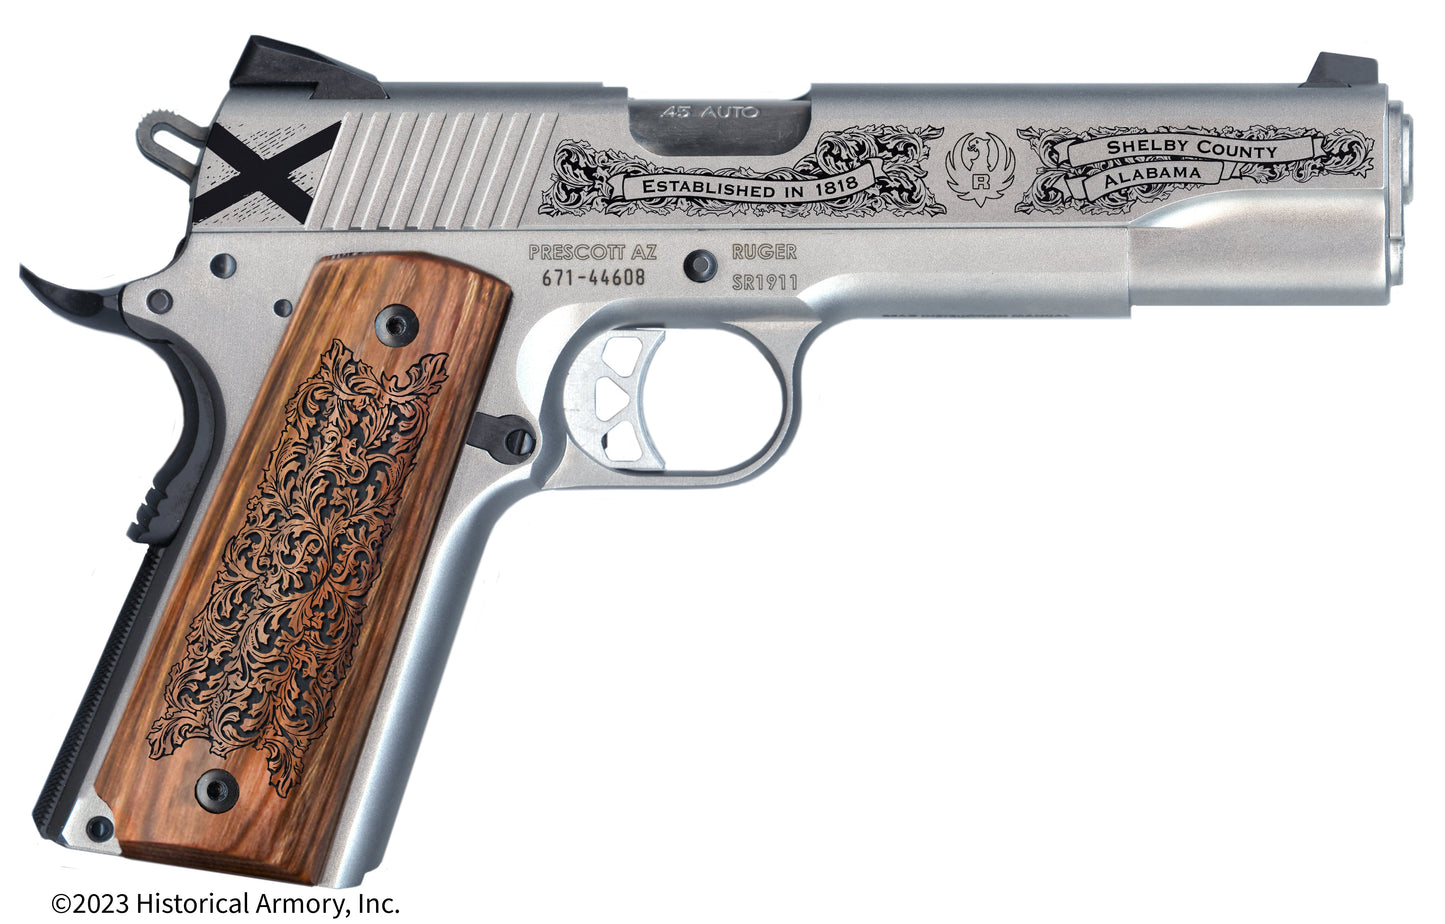 Shelby County Alabama Engraved .45 Auto Ruger 1911